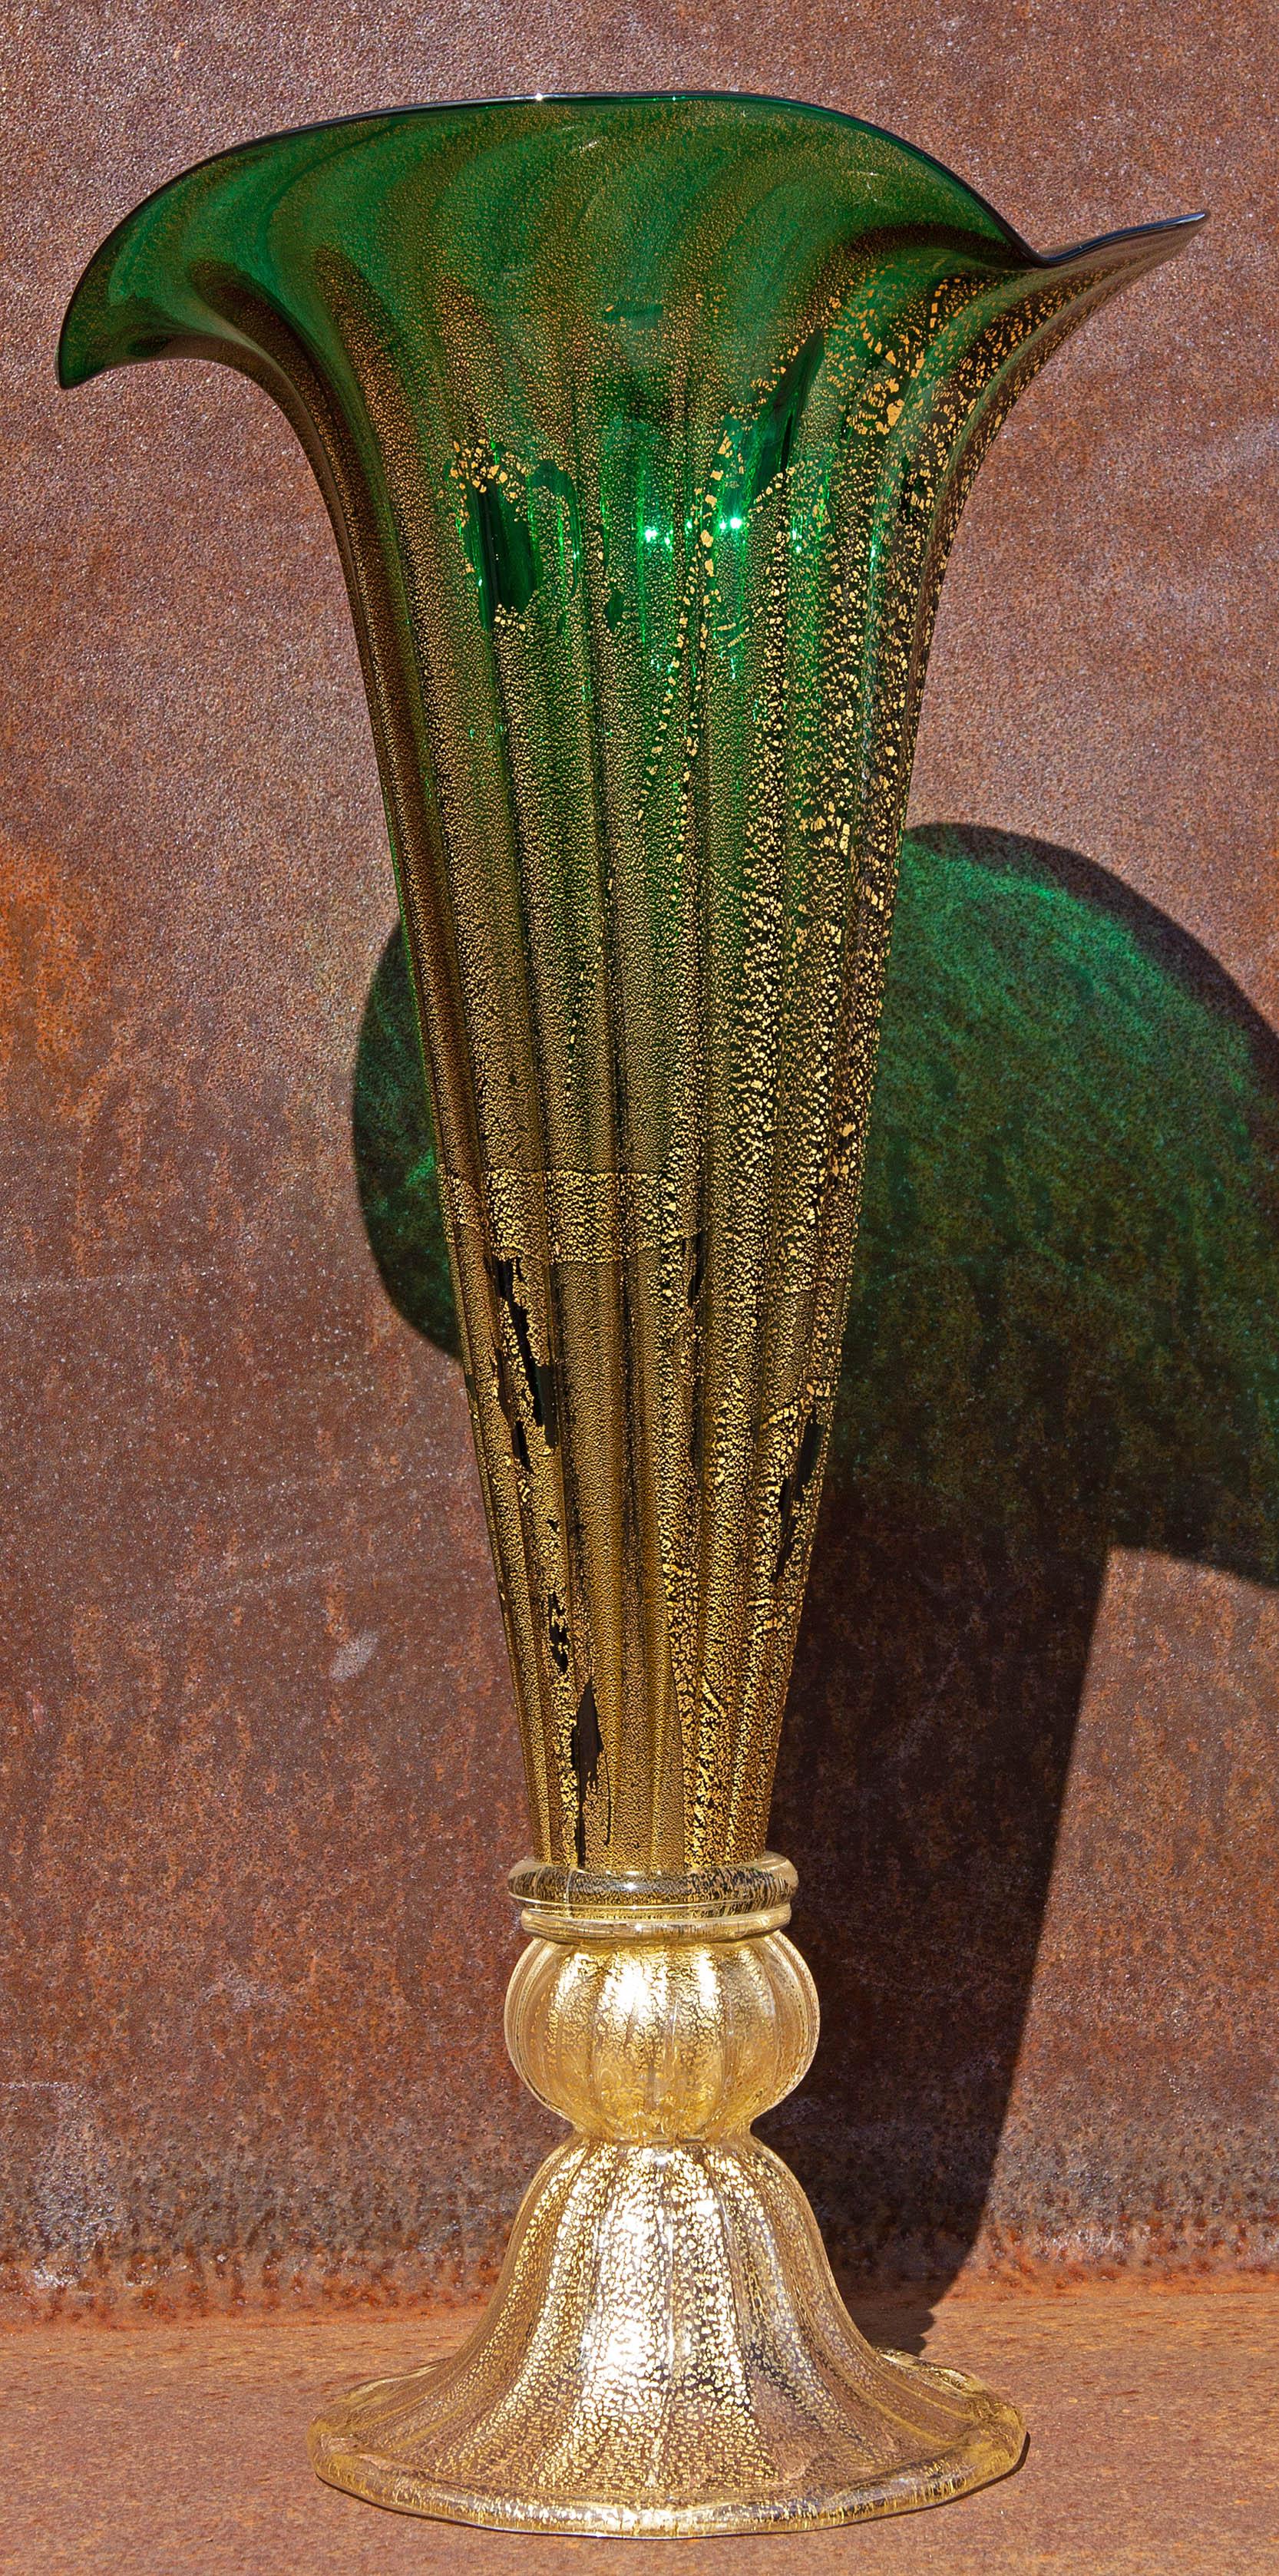 Monumental sculptural Venetian glass vase. Emerald green glass with infused 24-karat gold flakes. Mid-20th century. Measures: 20 1/4